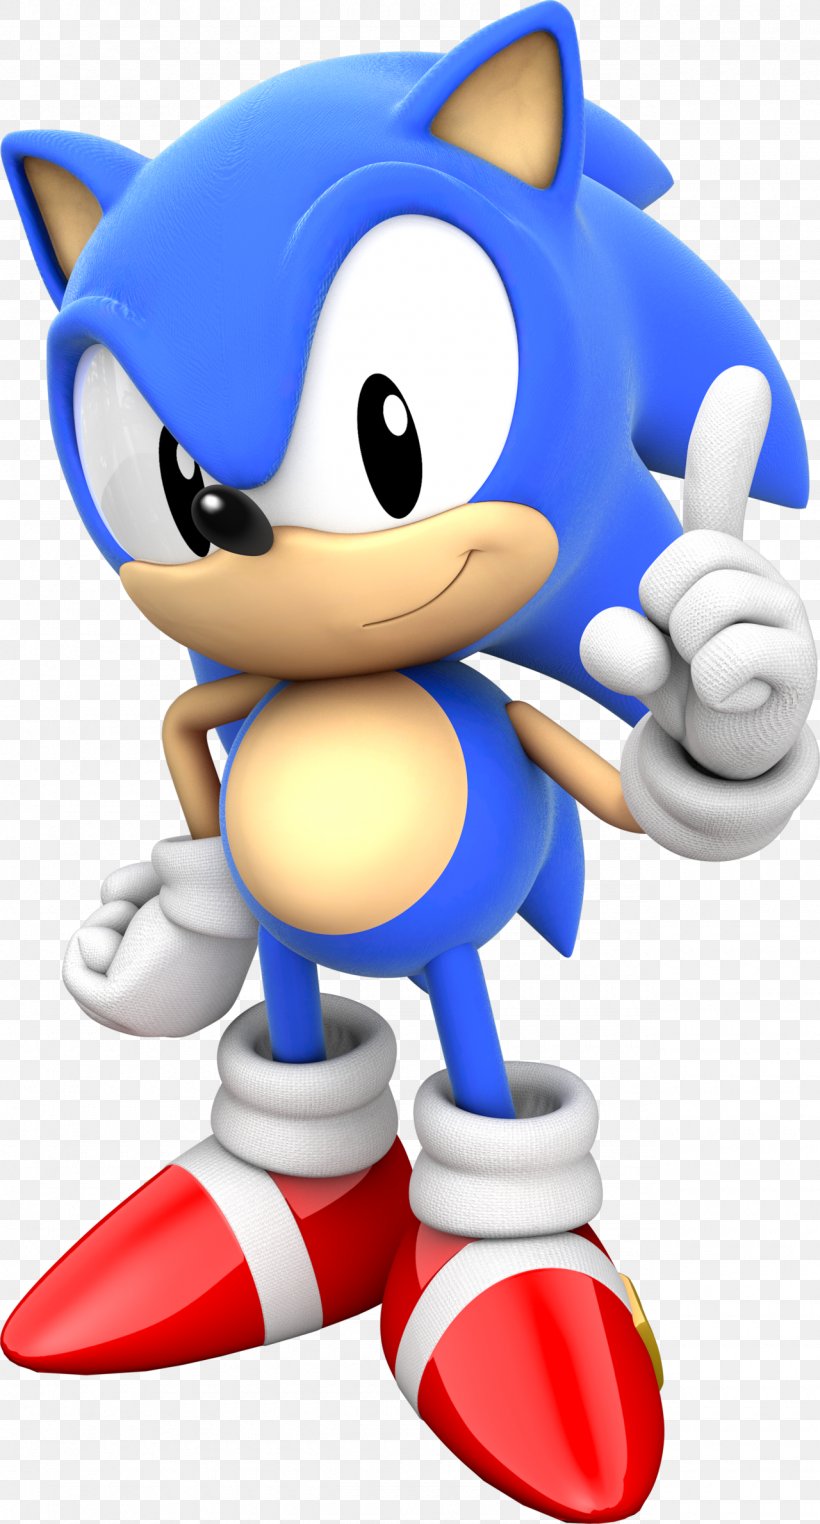 Sonic The Hedgehog 2 Sonic Mania Five Nights At Freddy's Video Game, PNG, 1280x2379px, Sonic The Hedgehog, Cartoon, Fangame, Fictional Character, Figurine Download Free